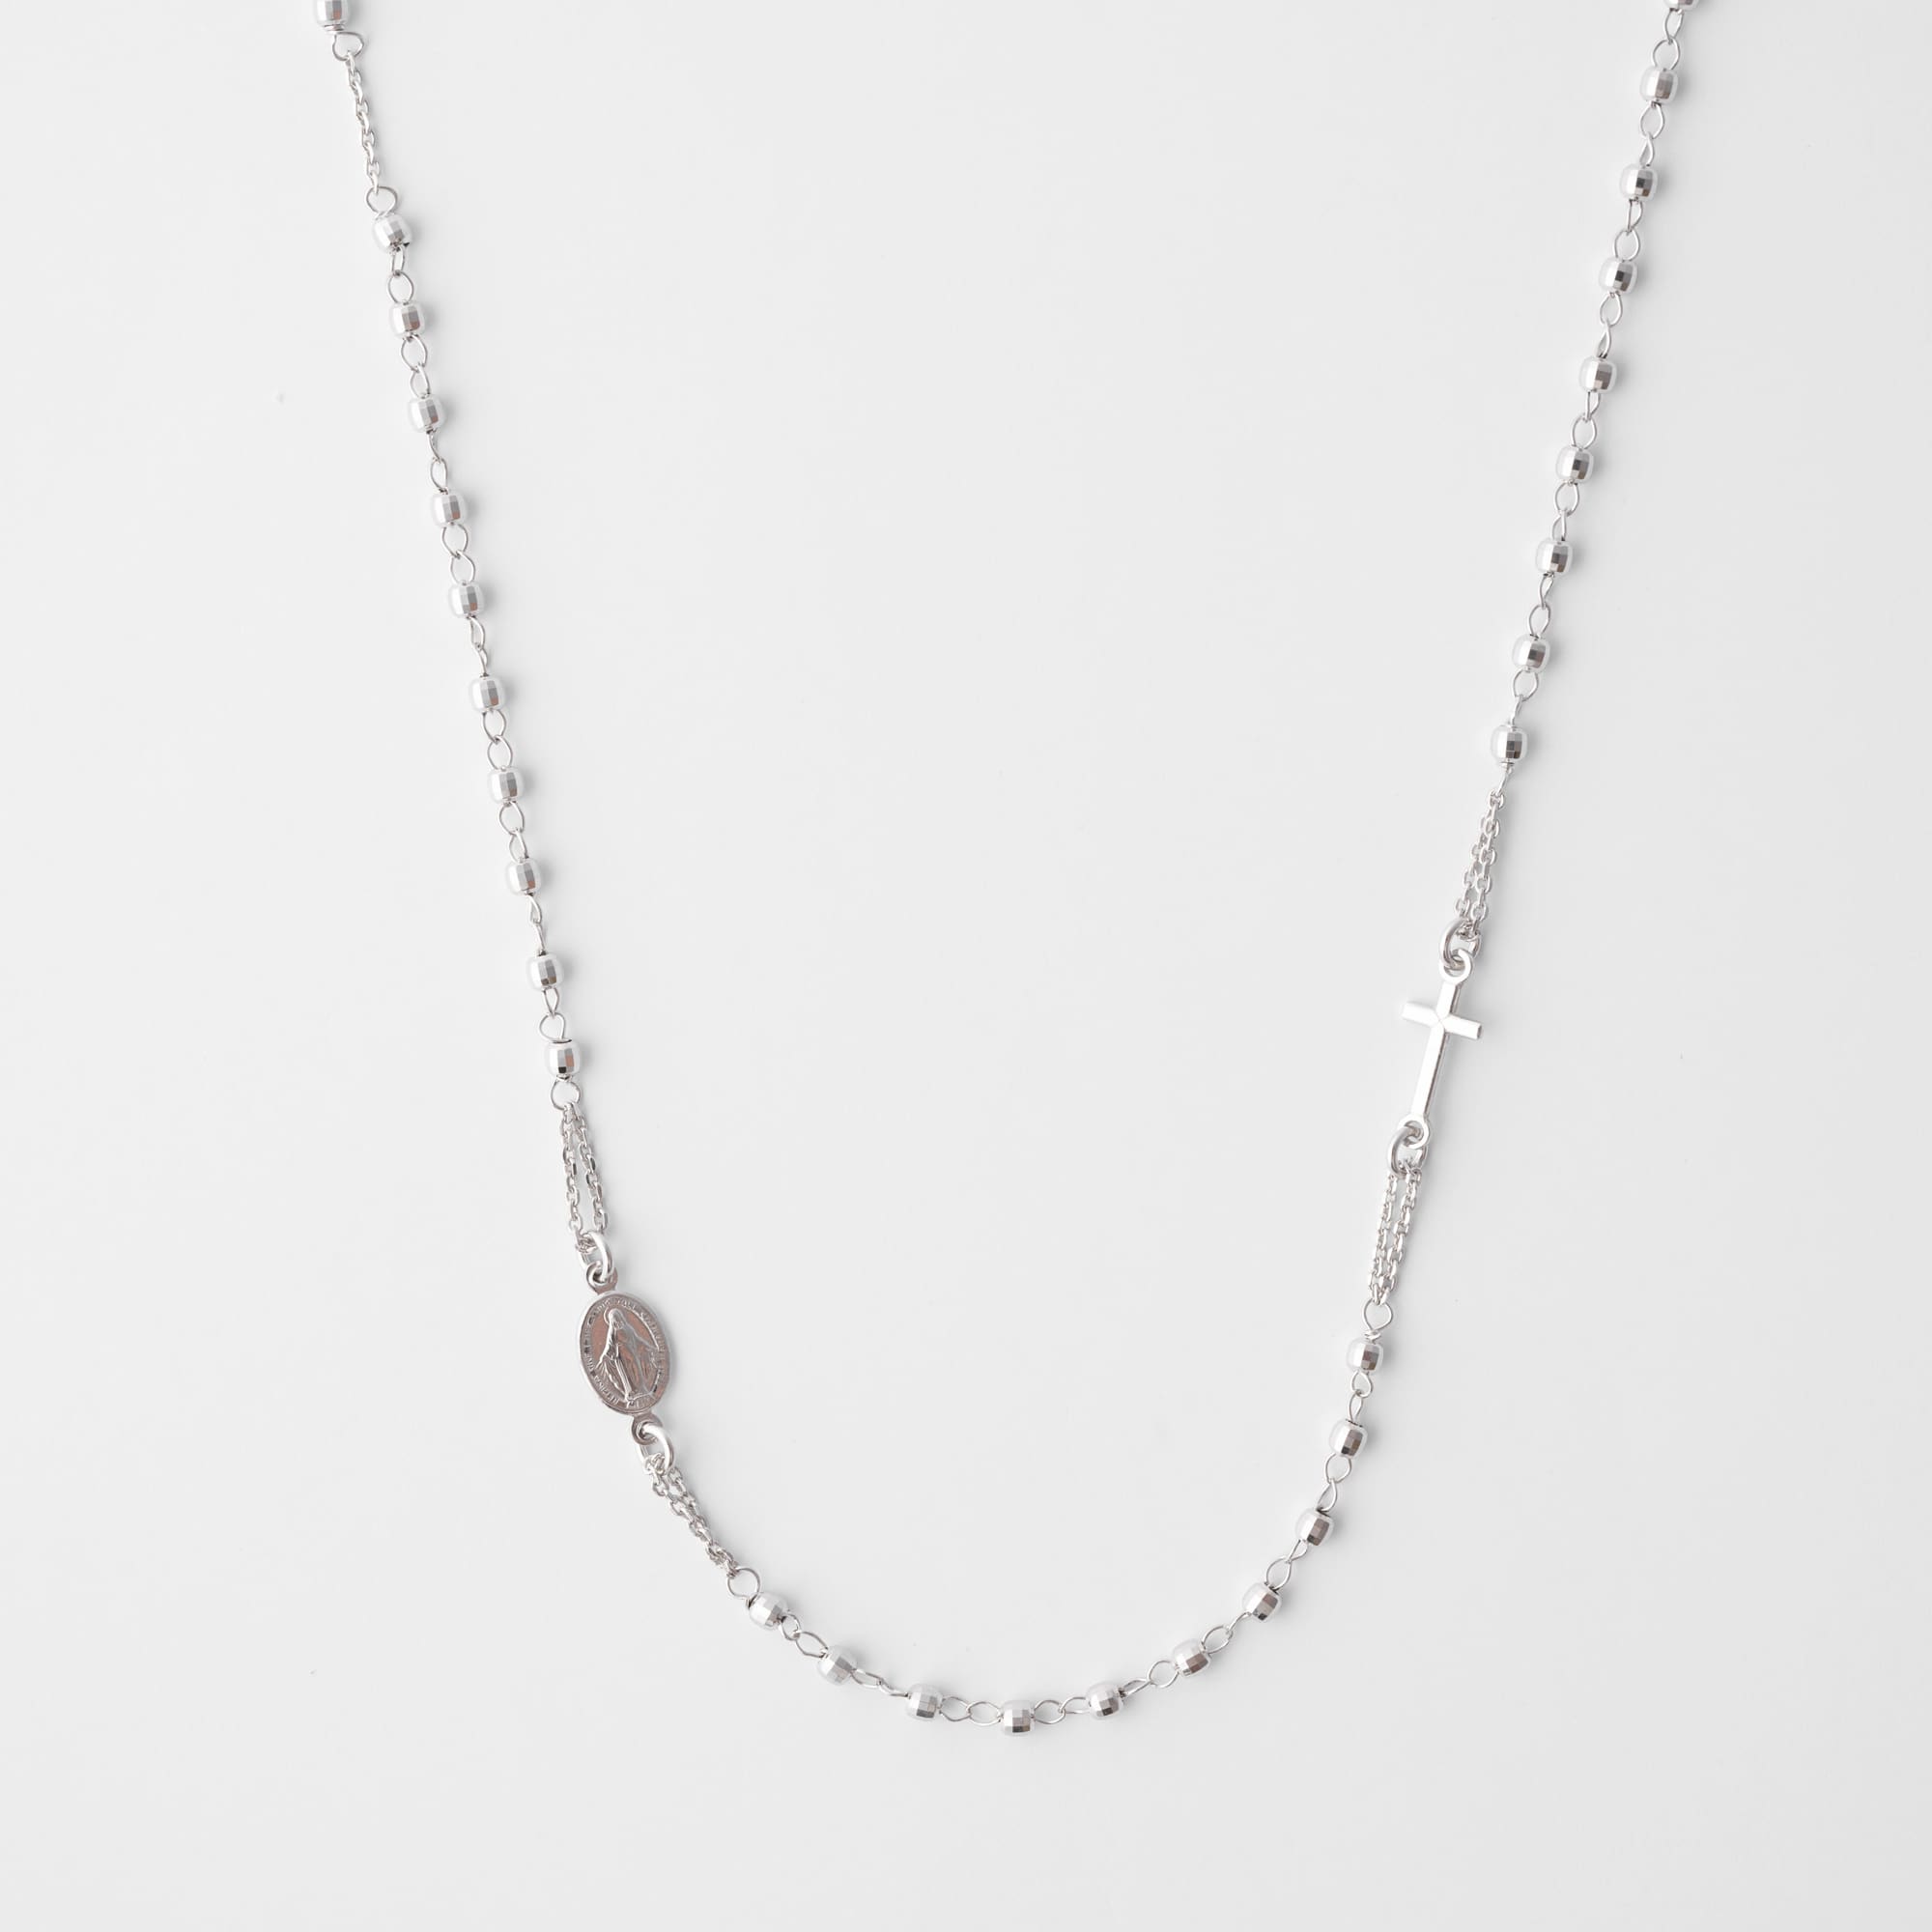 ROSARY necklace with diamond cut beads